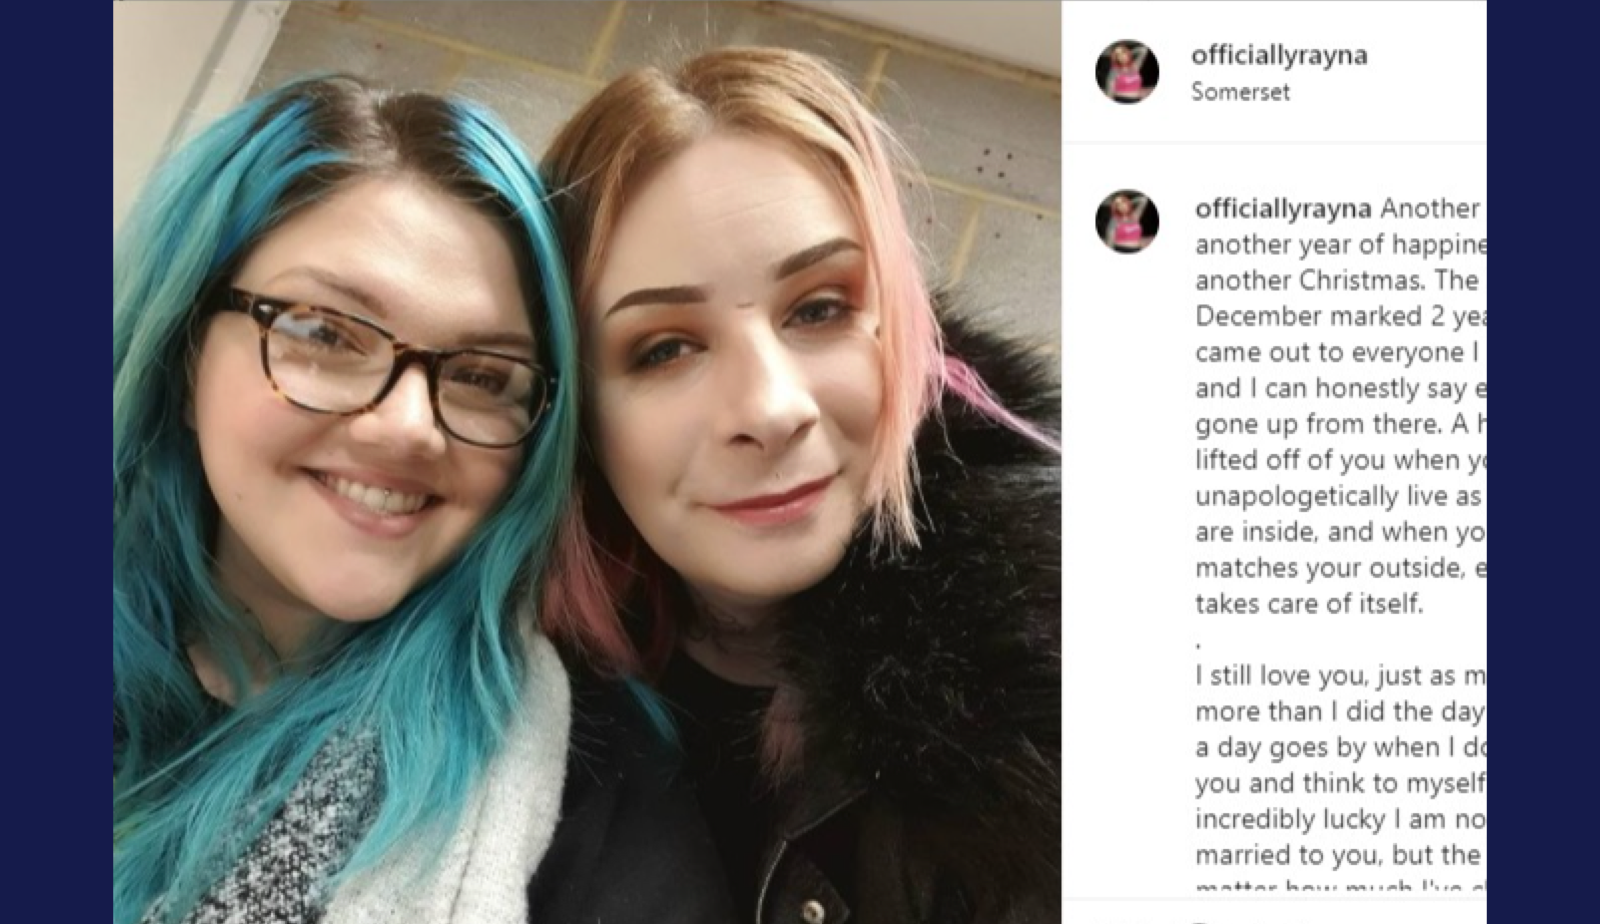 They got married before she came out as trans. Now they will hold a &#8220;re-wedding.&#8221;